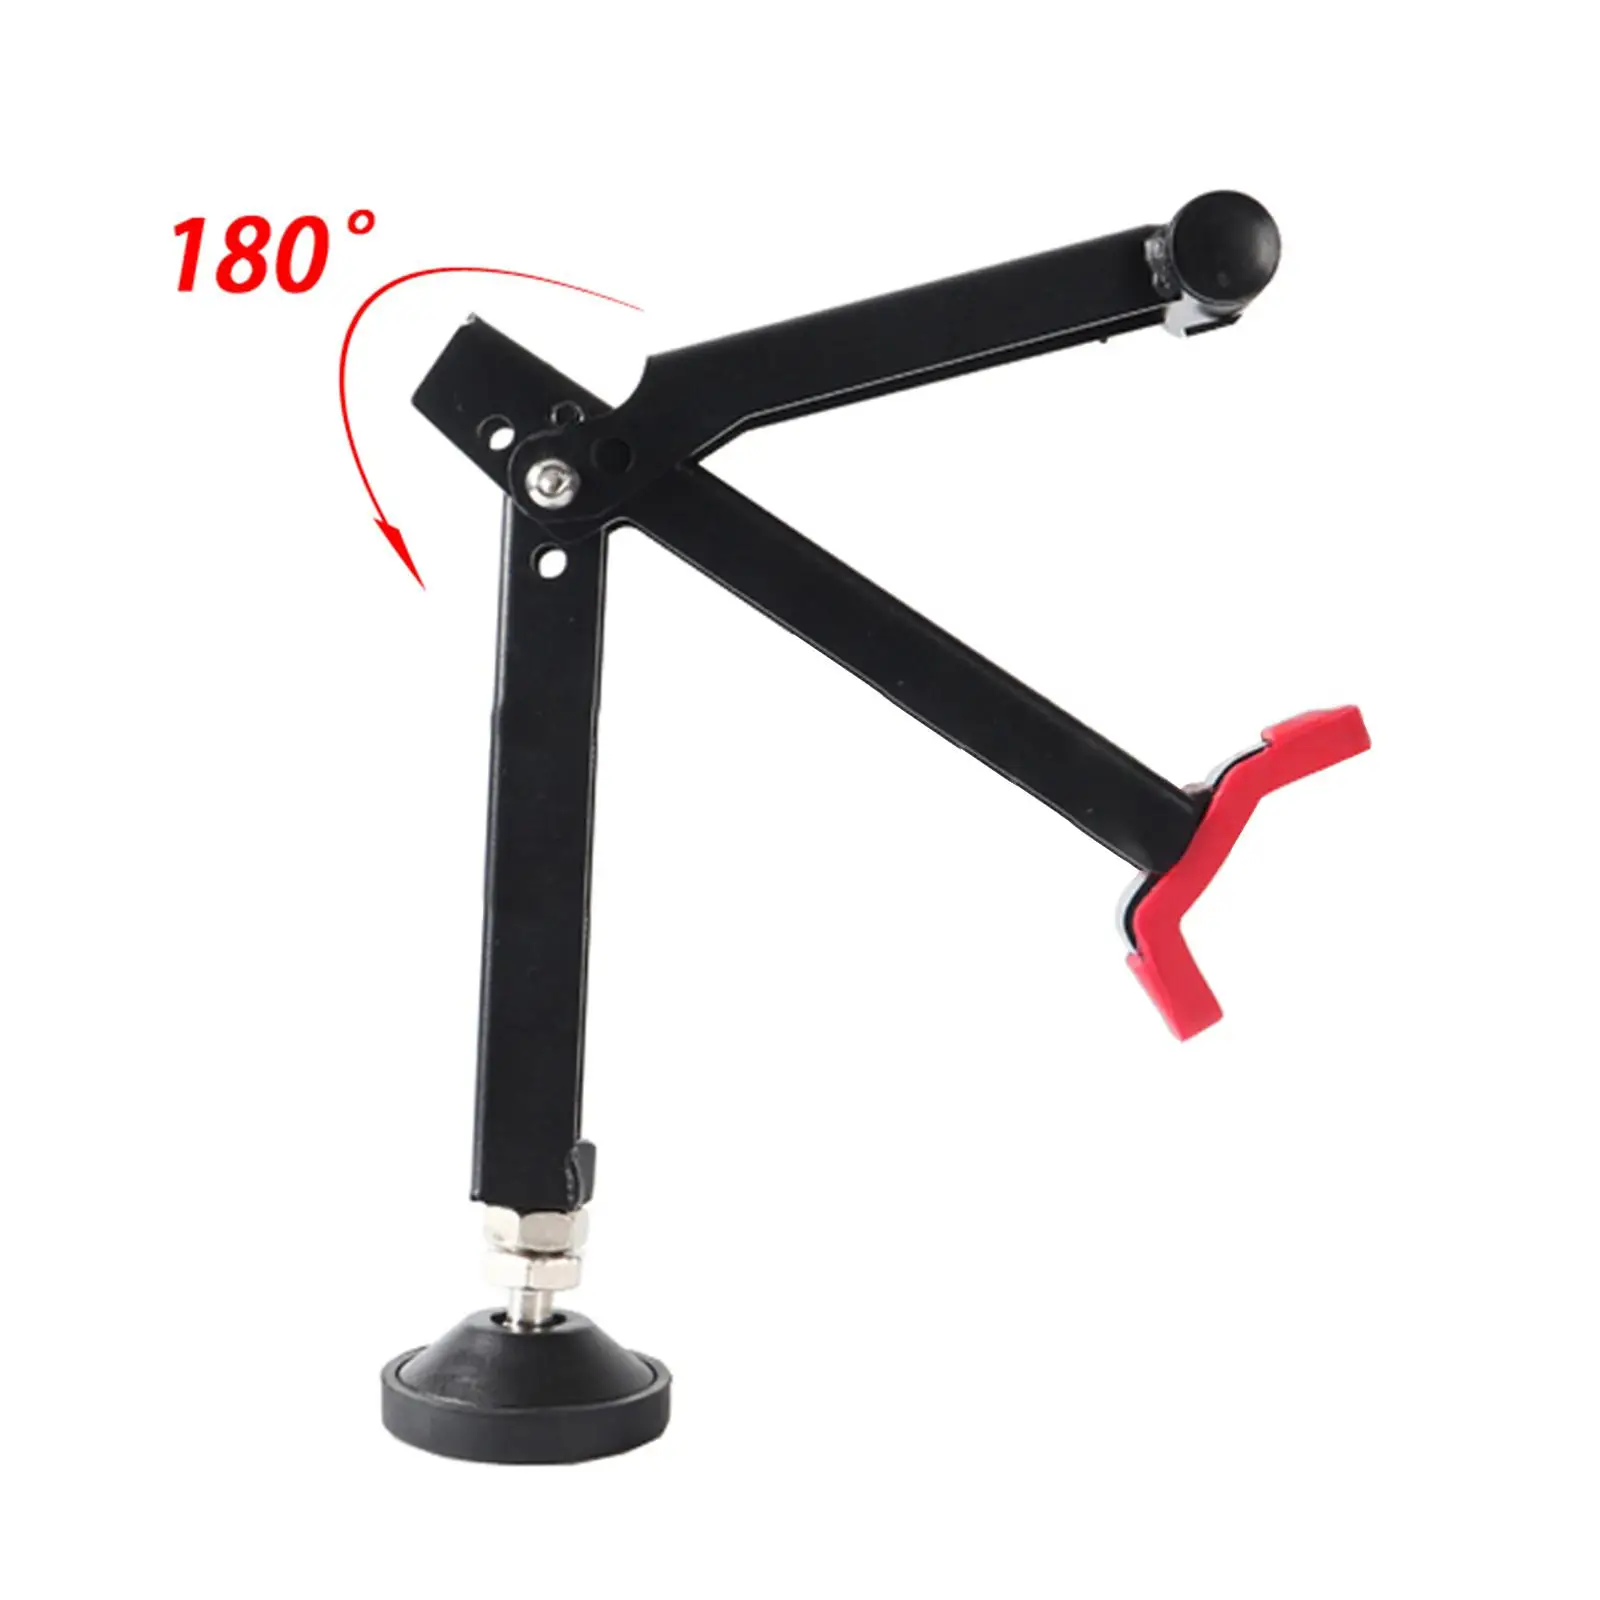 Motorbike Wheel Support Side Stand Expandable Accs Fit for Bike Repairing